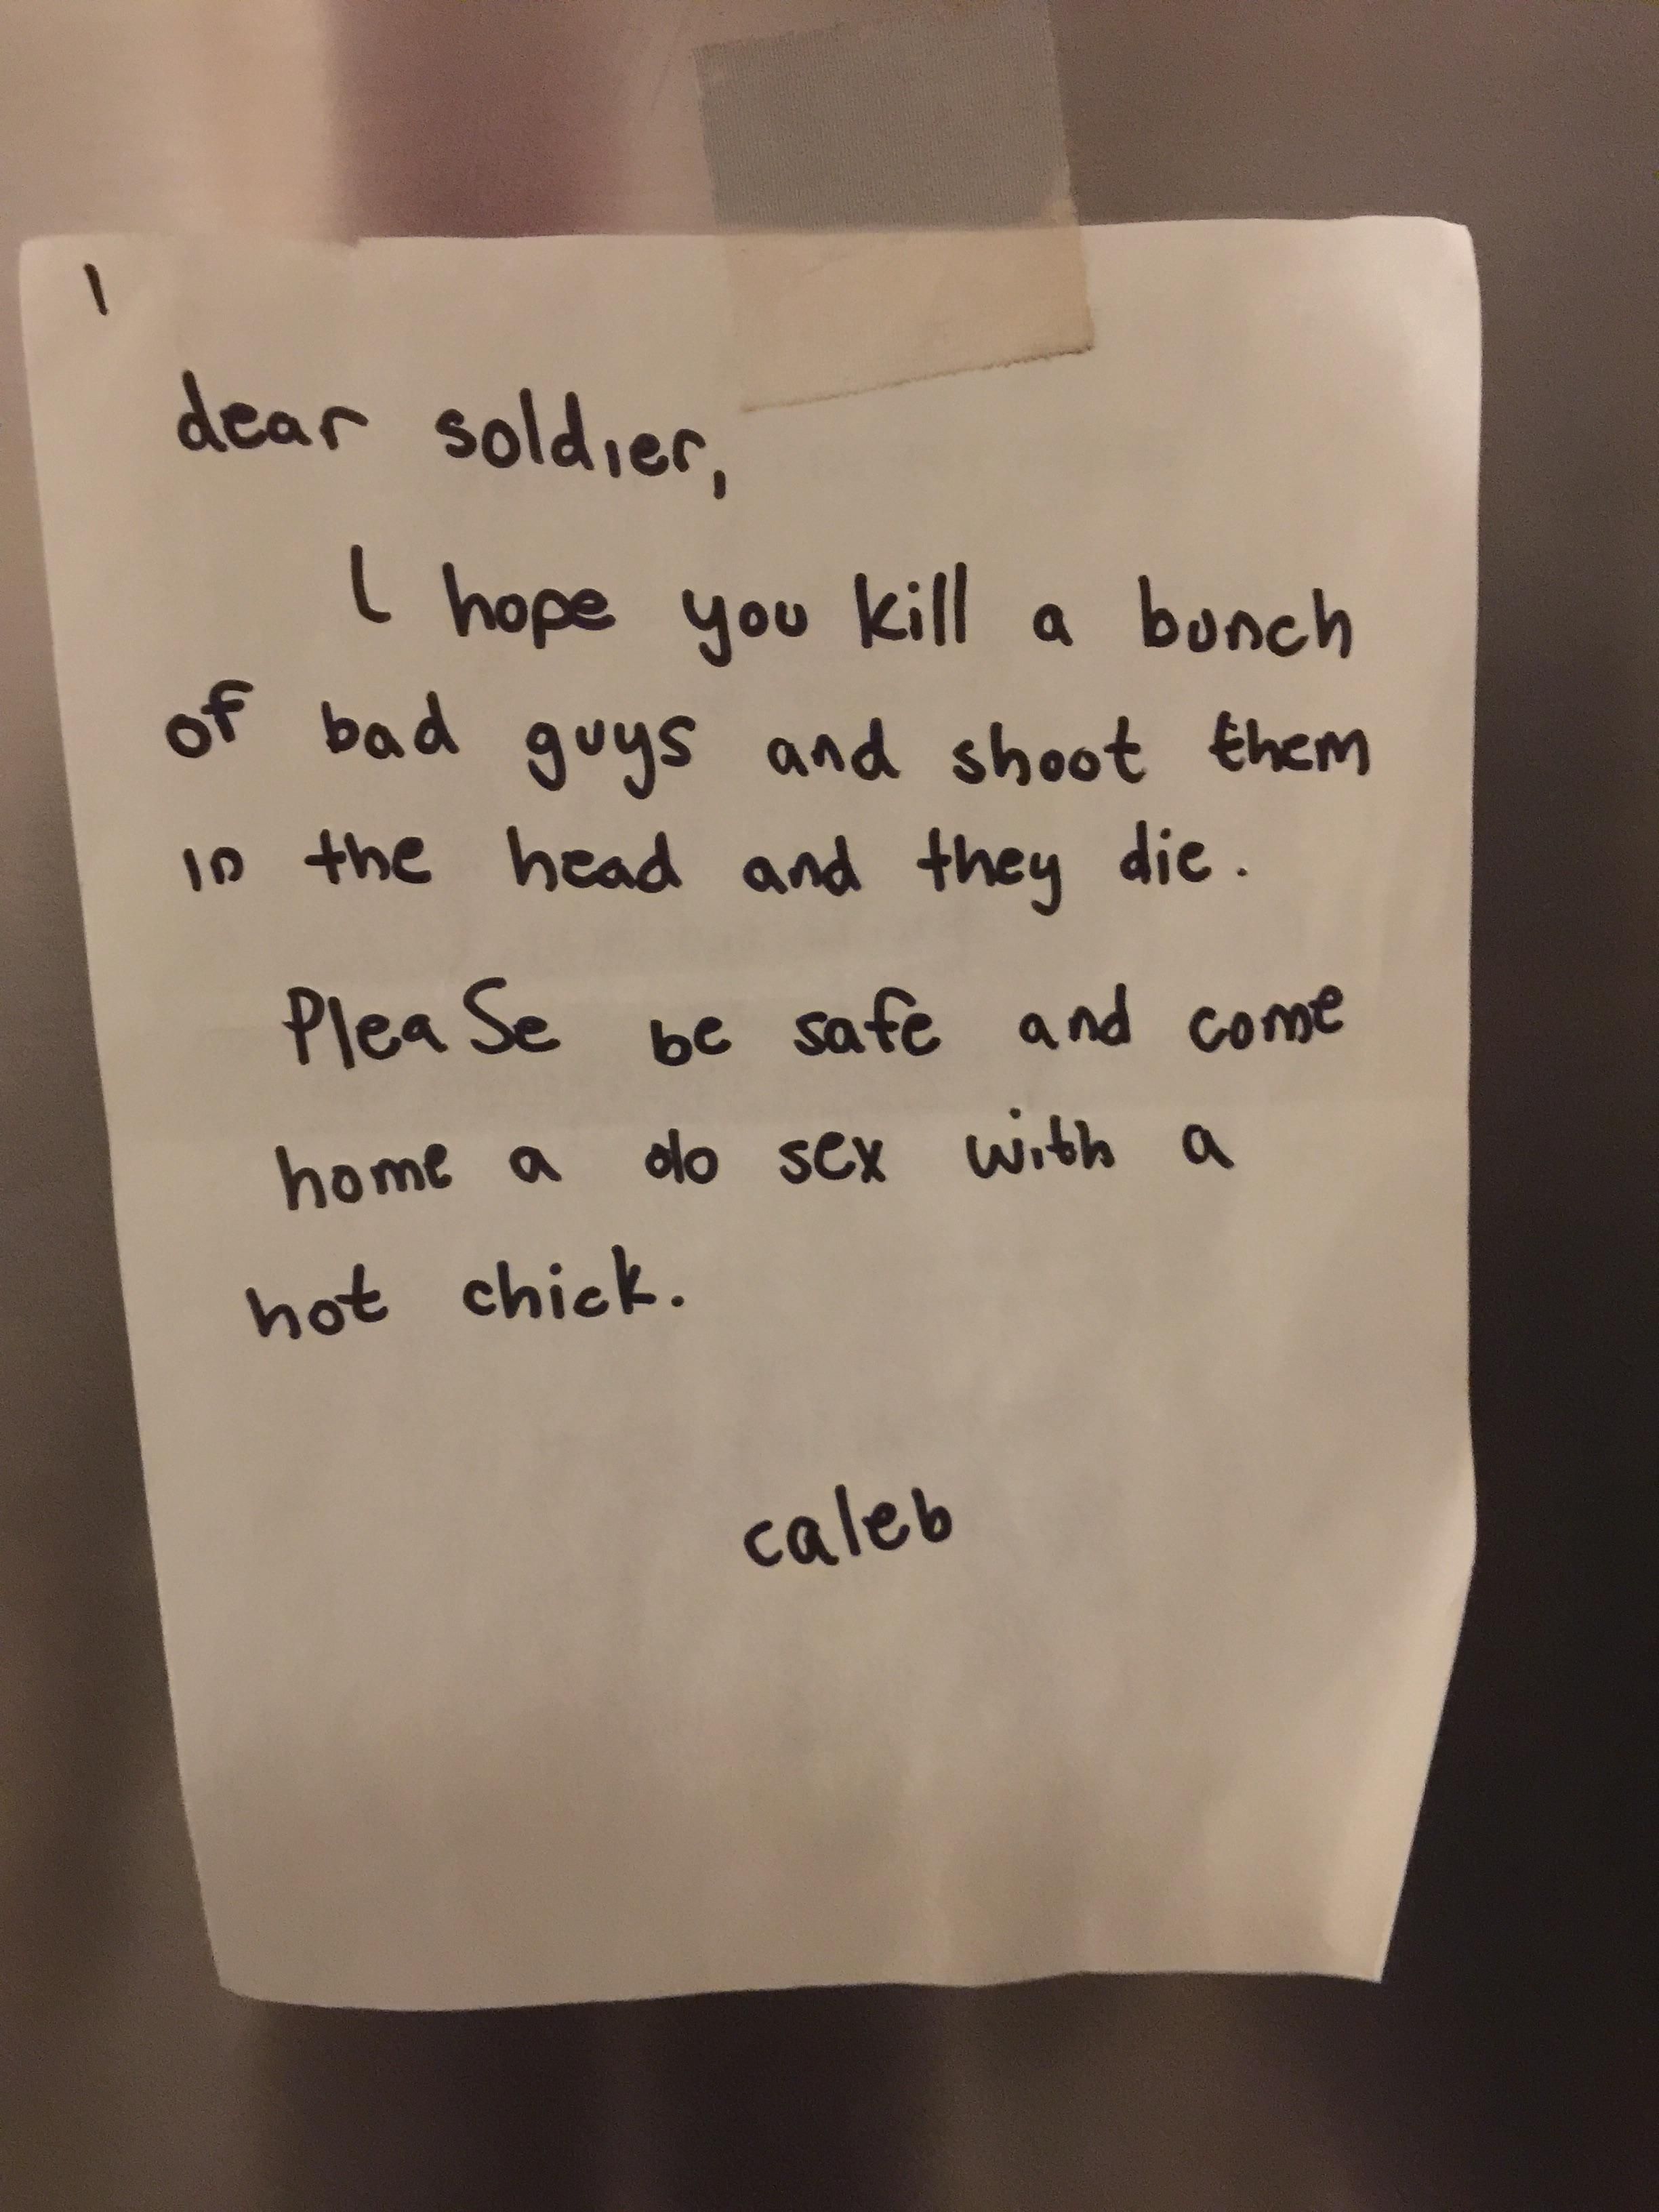 My squadron recently arrived overseas, and this was pinned up on the refrigerator. Thank you for your support Caleb!!